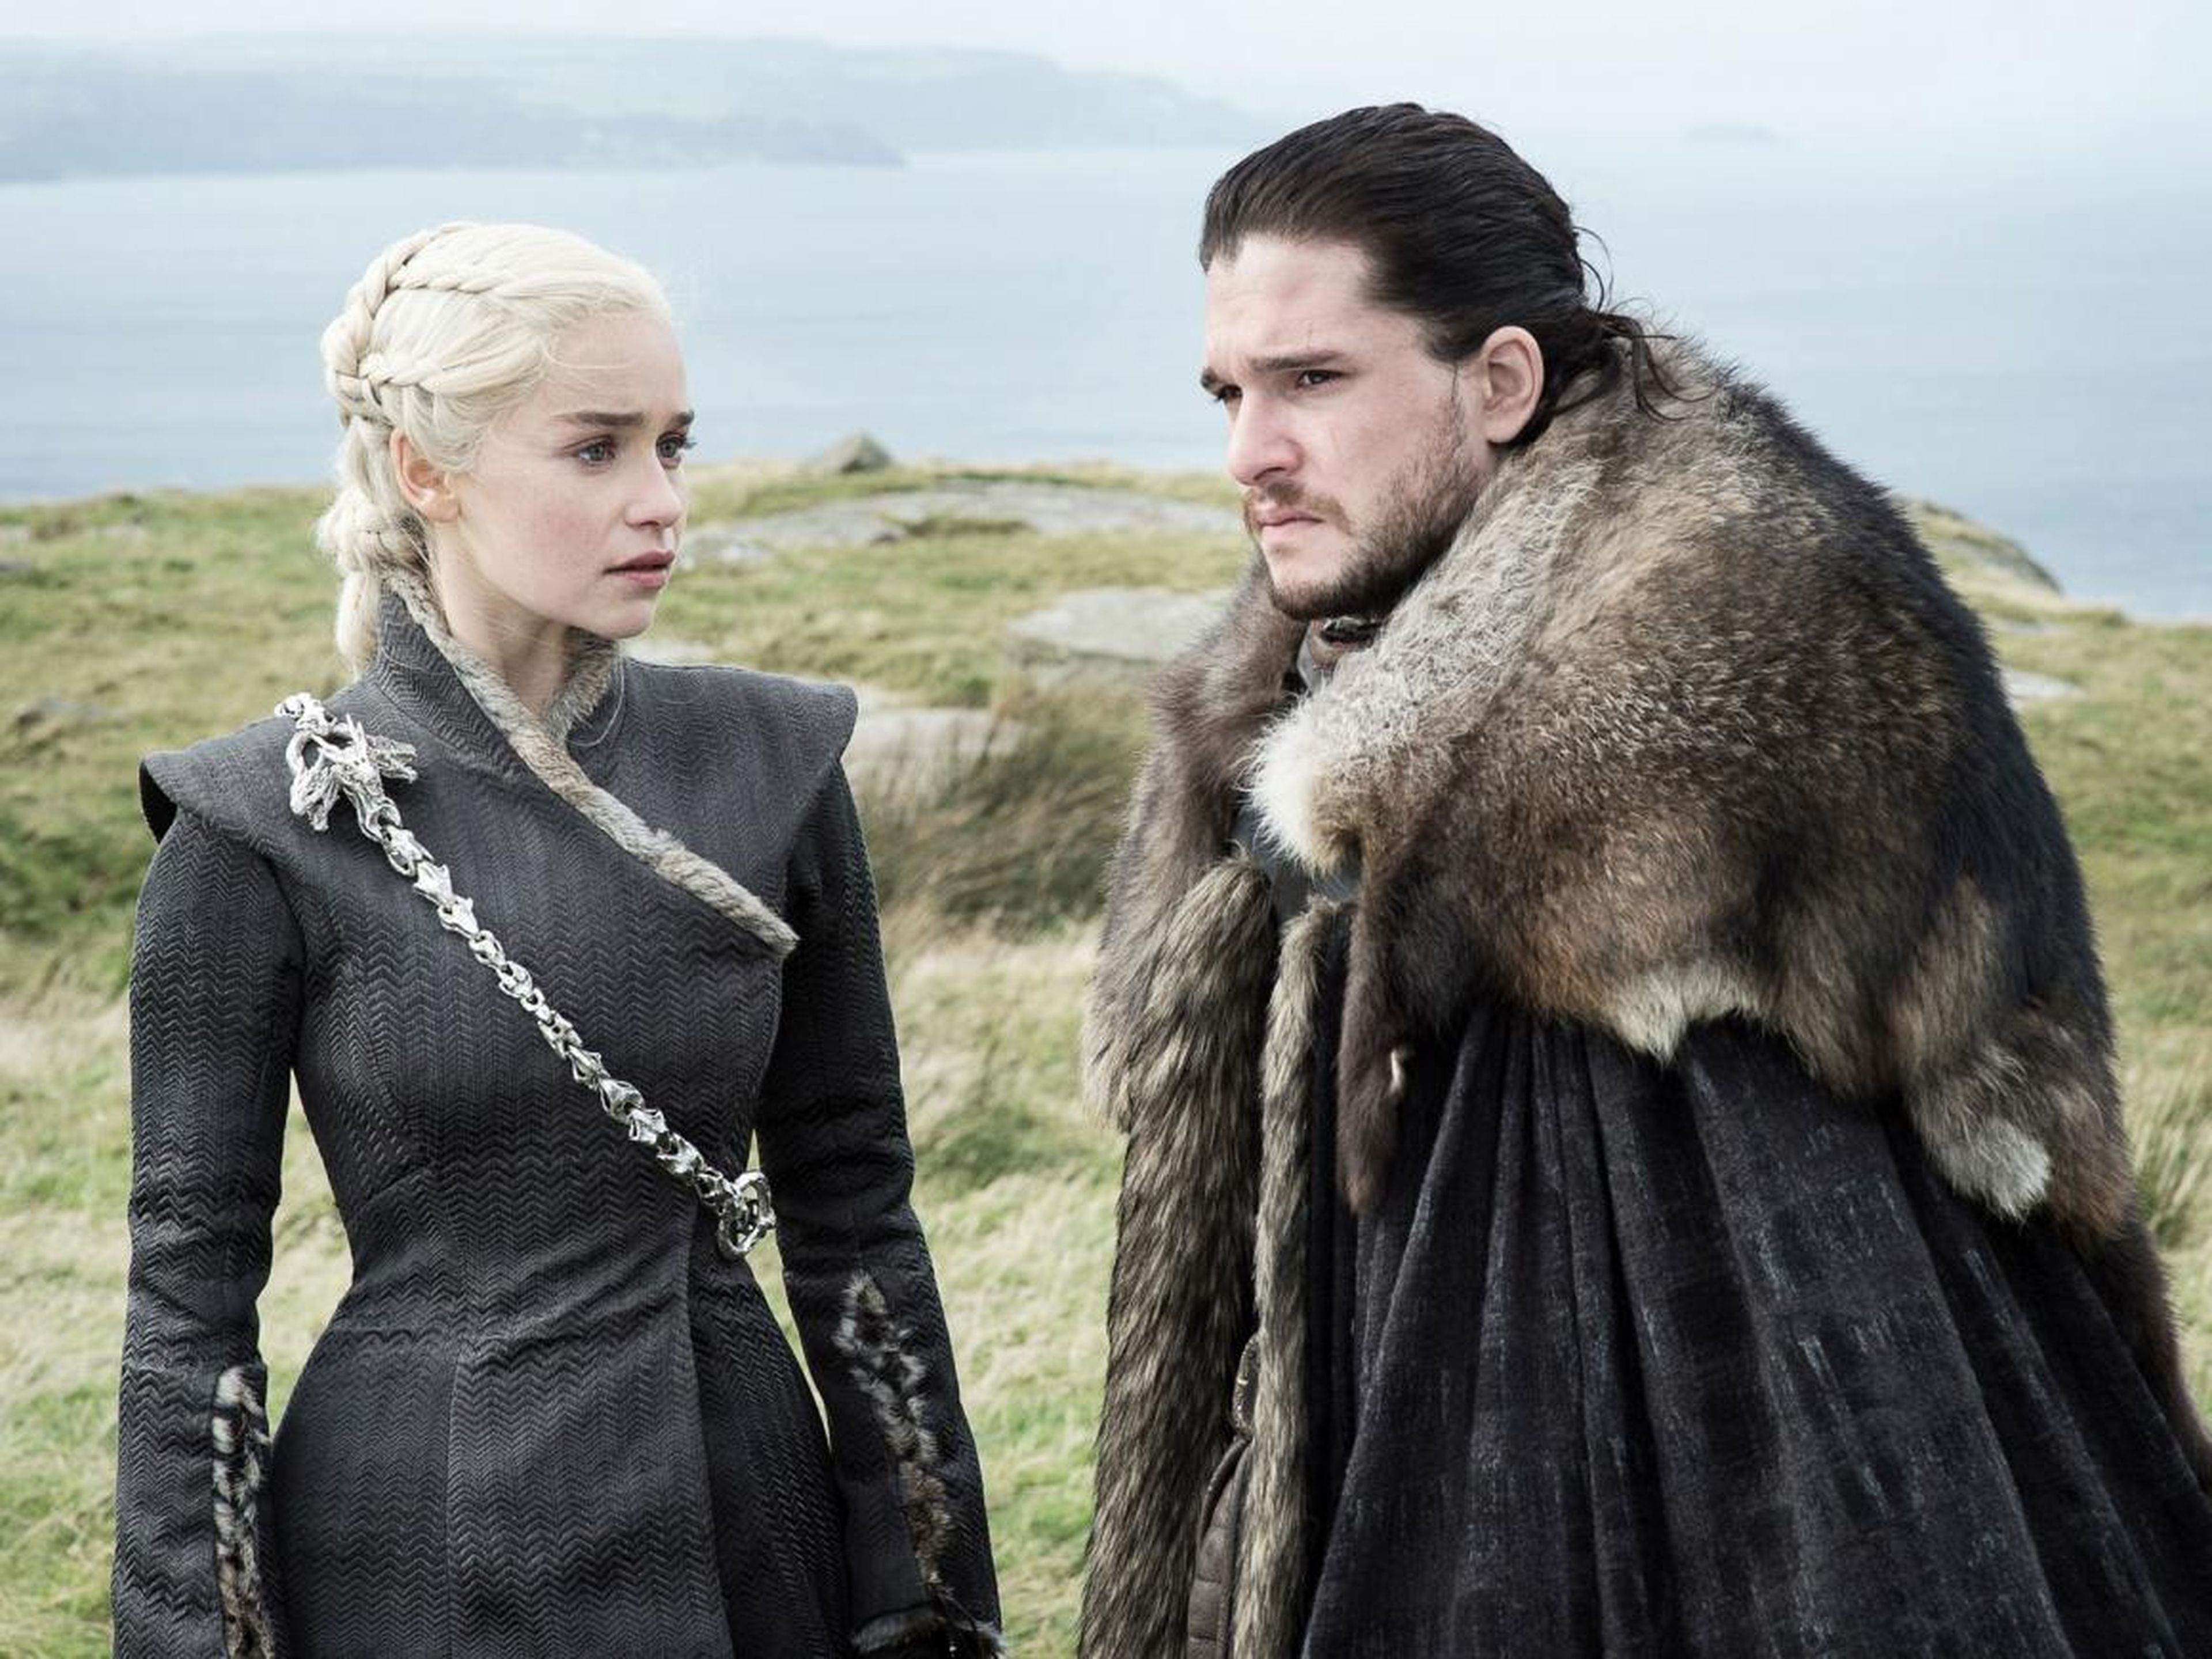 Daenerys and Jon Snow in "Game of Thrones."